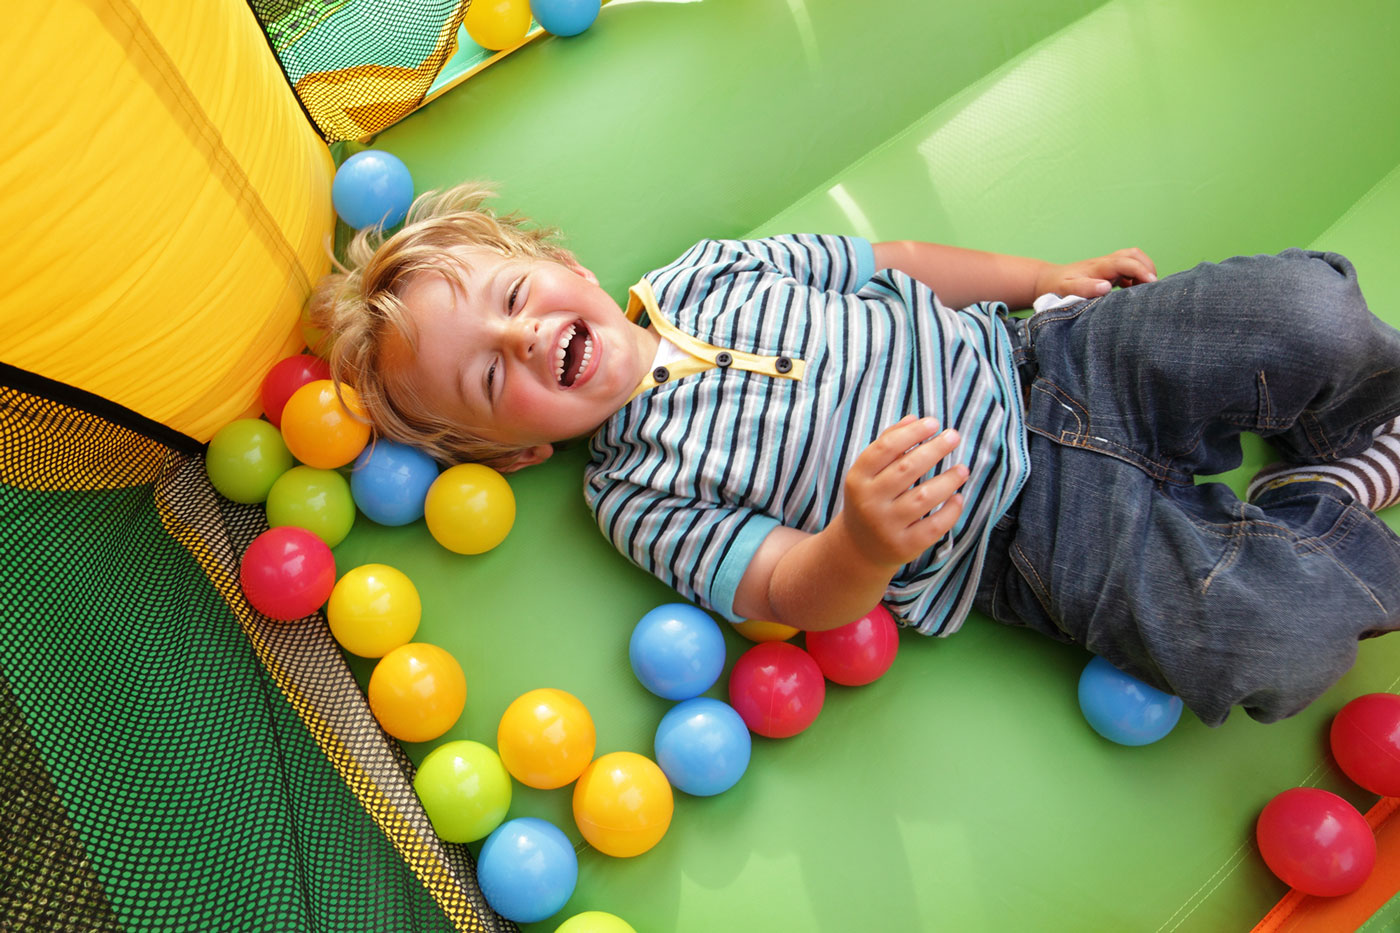 A child having fun playing in the ball pit